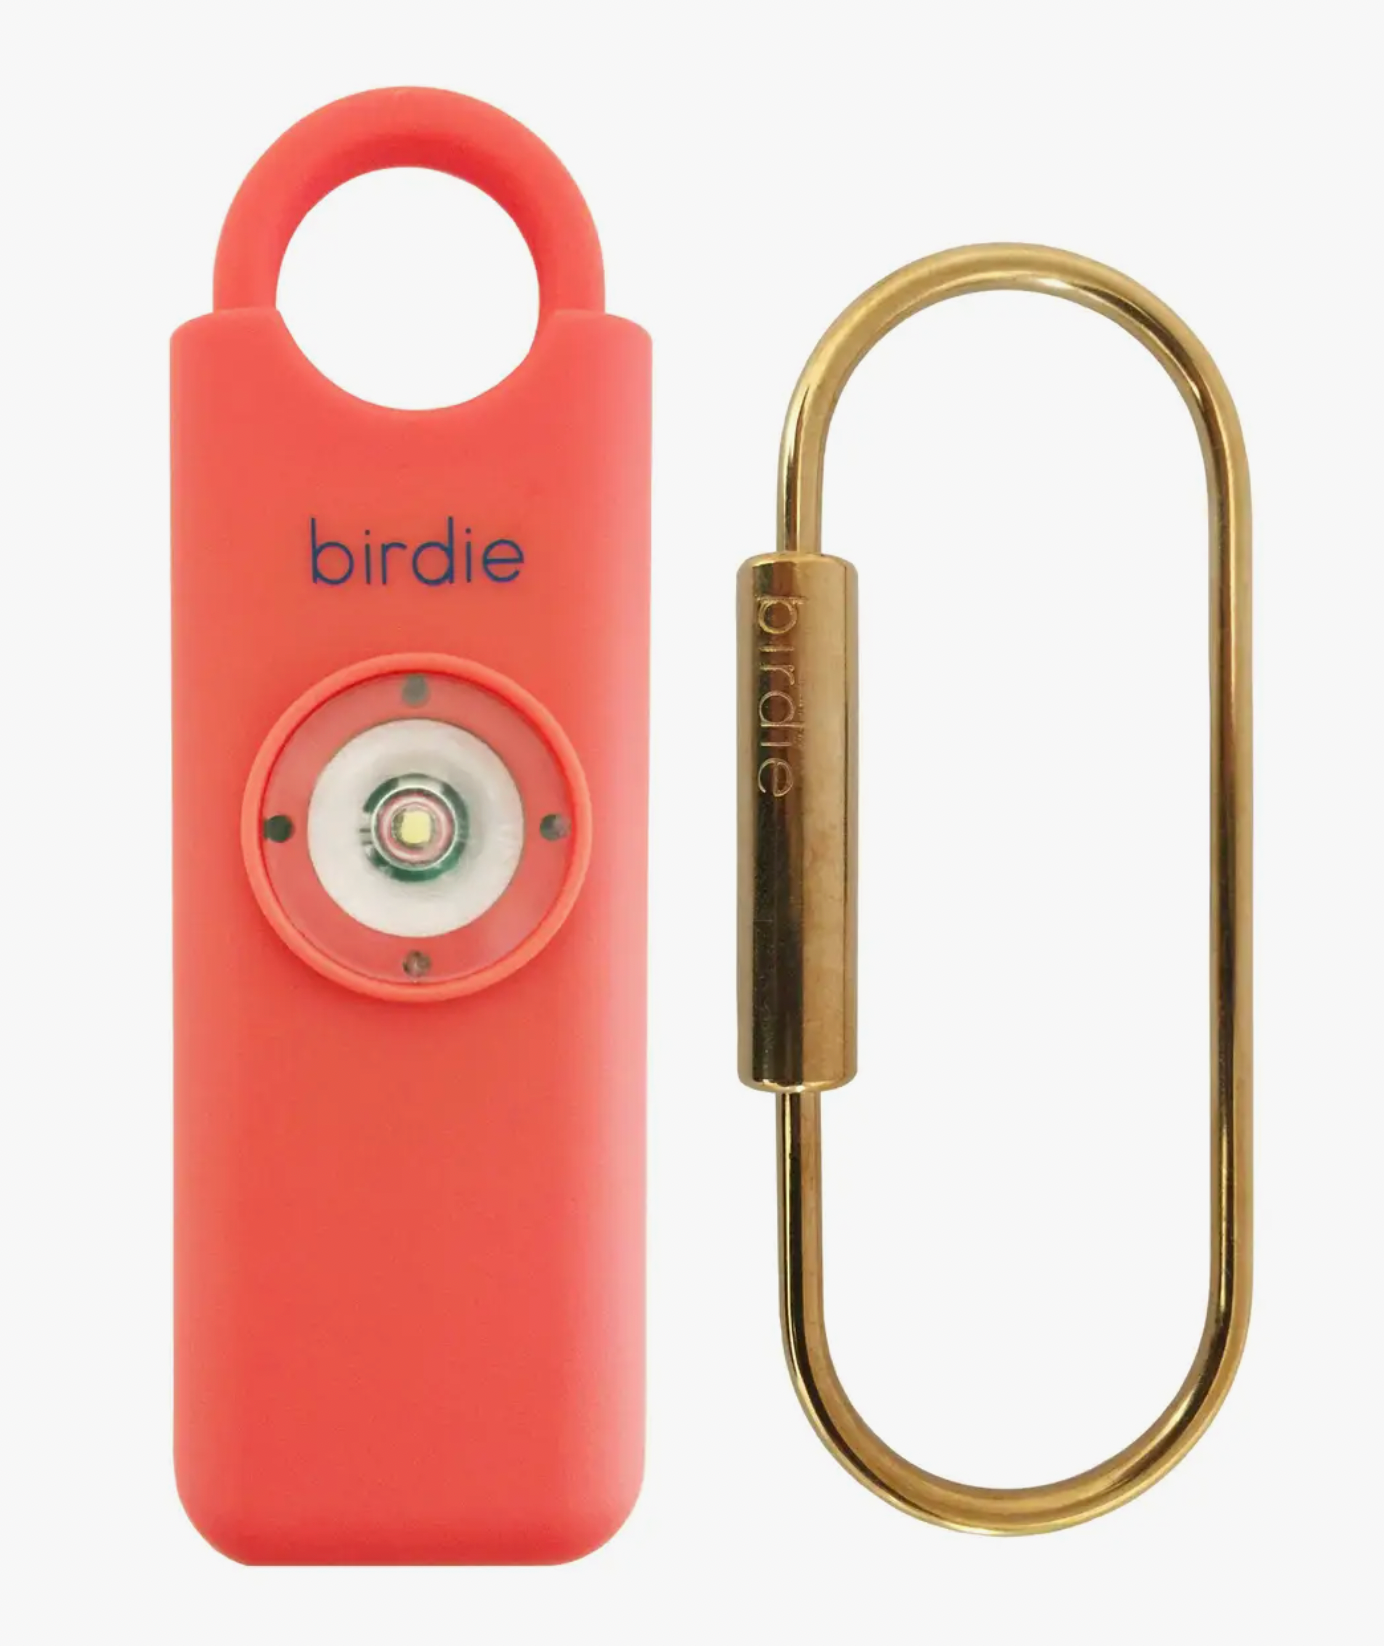 SHE'S BIRDIE PERSONAL SAFETY ALARM